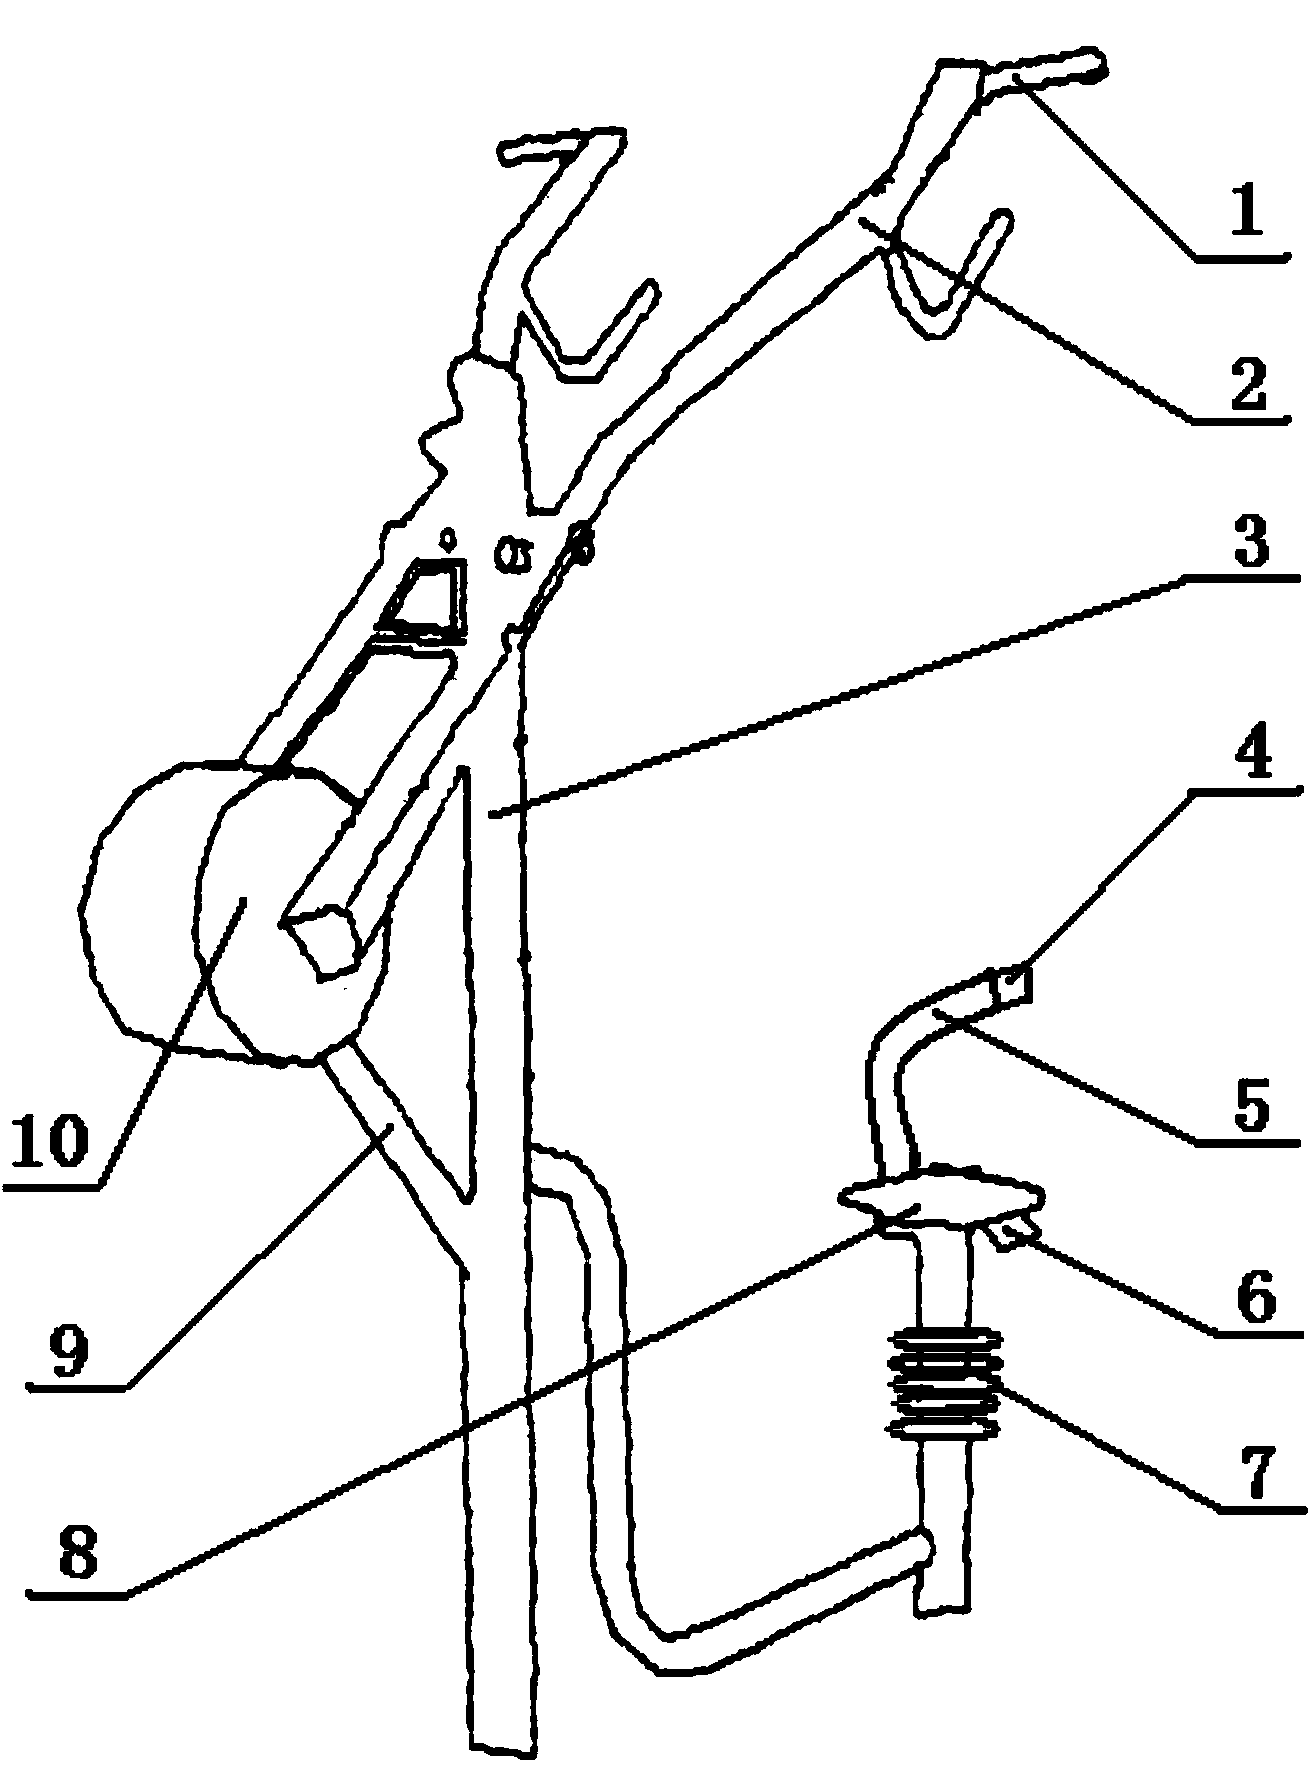 Arm strength training equipment with auxiliary device